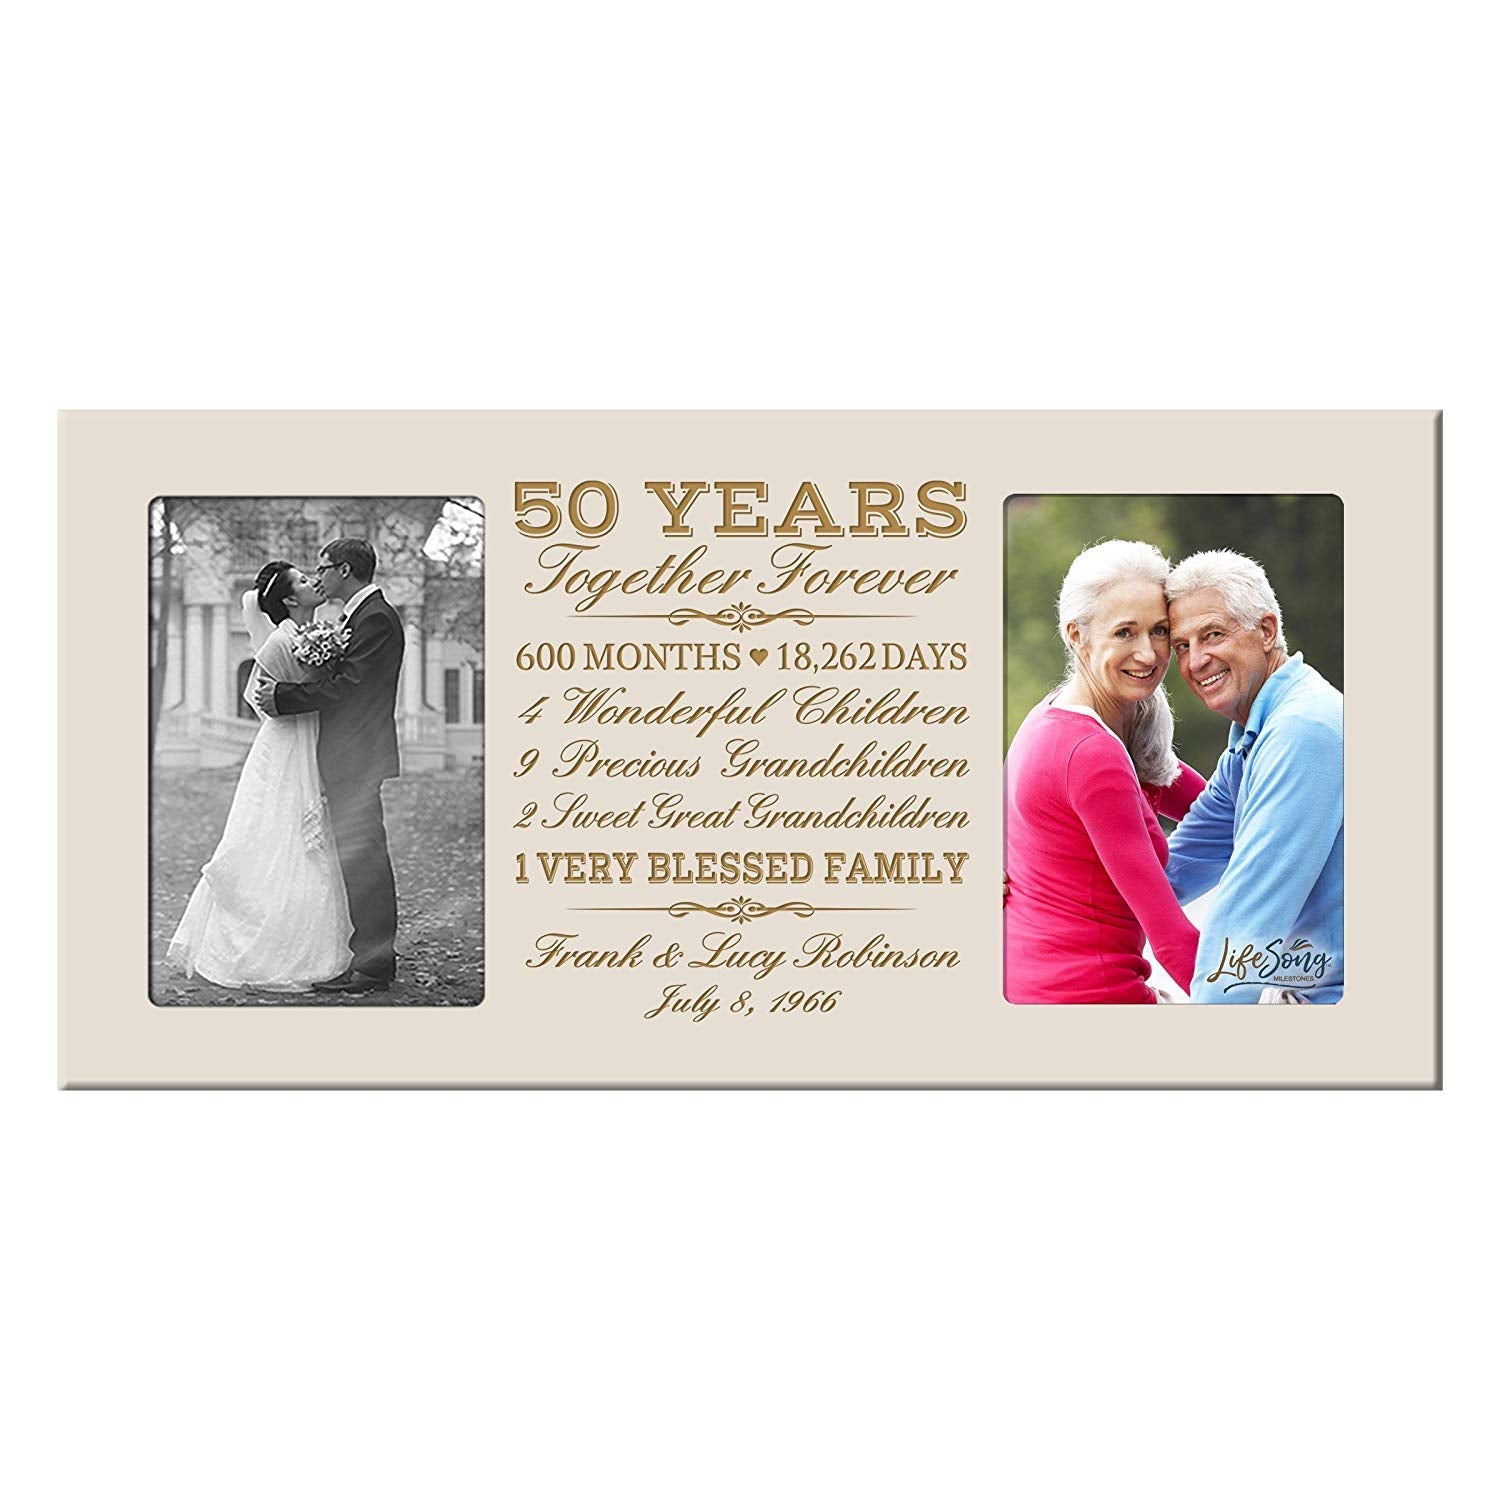 Lifesong Milestones Personalized Picture Frame for Couples 50th Wedding Anniversary Decorations